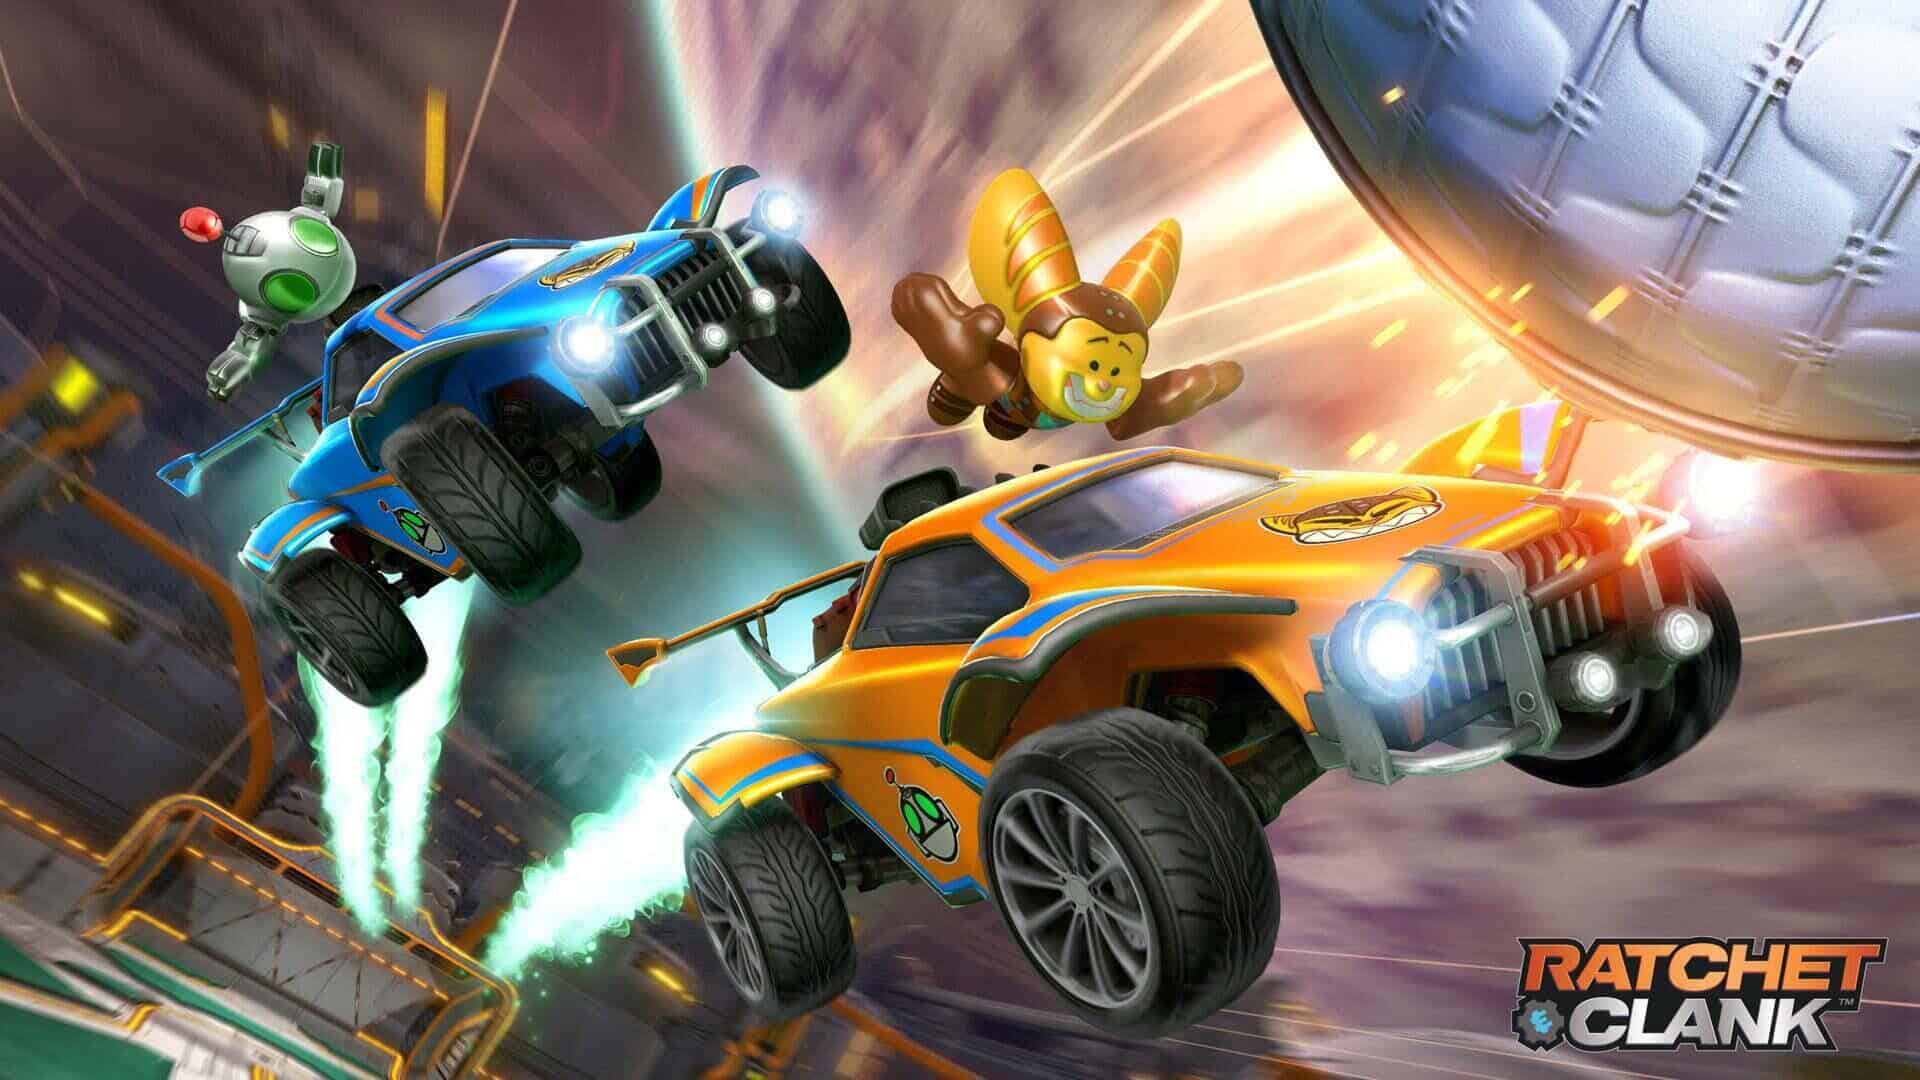 Rocket League on PlayStation 5 now 120 FPS capable